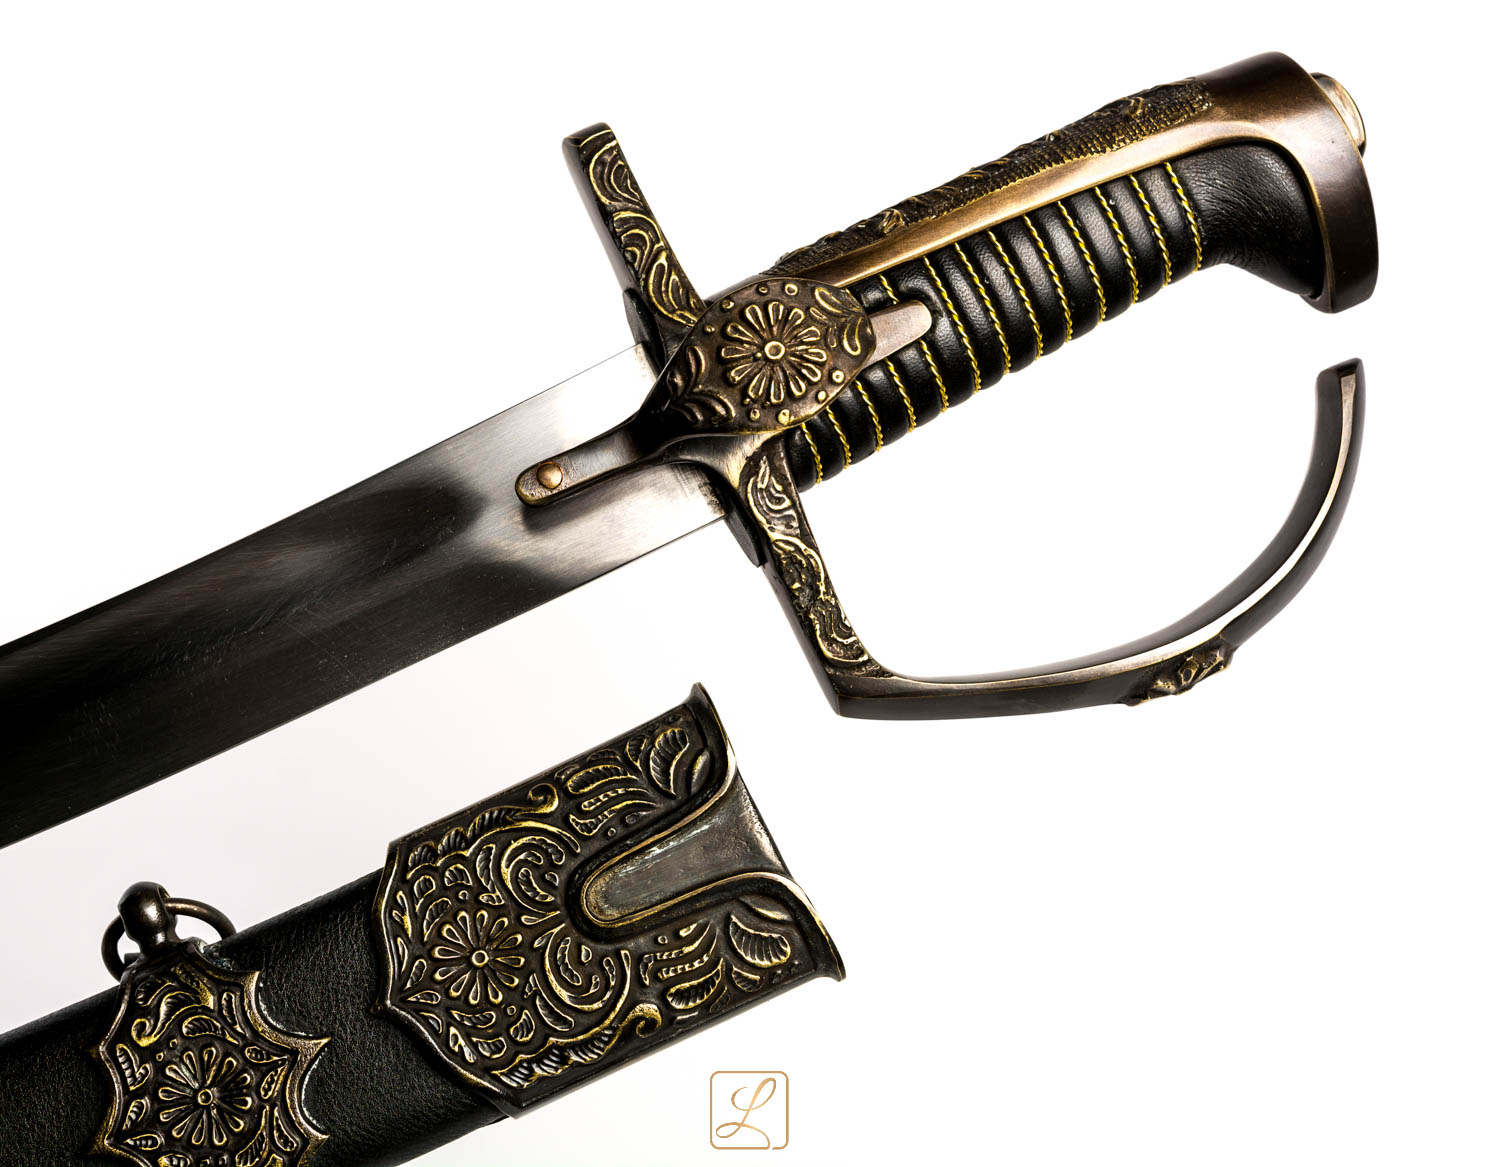 Polish Hussars hardened sabre with scabbard 17th century, decorated version. A beautiful gift!